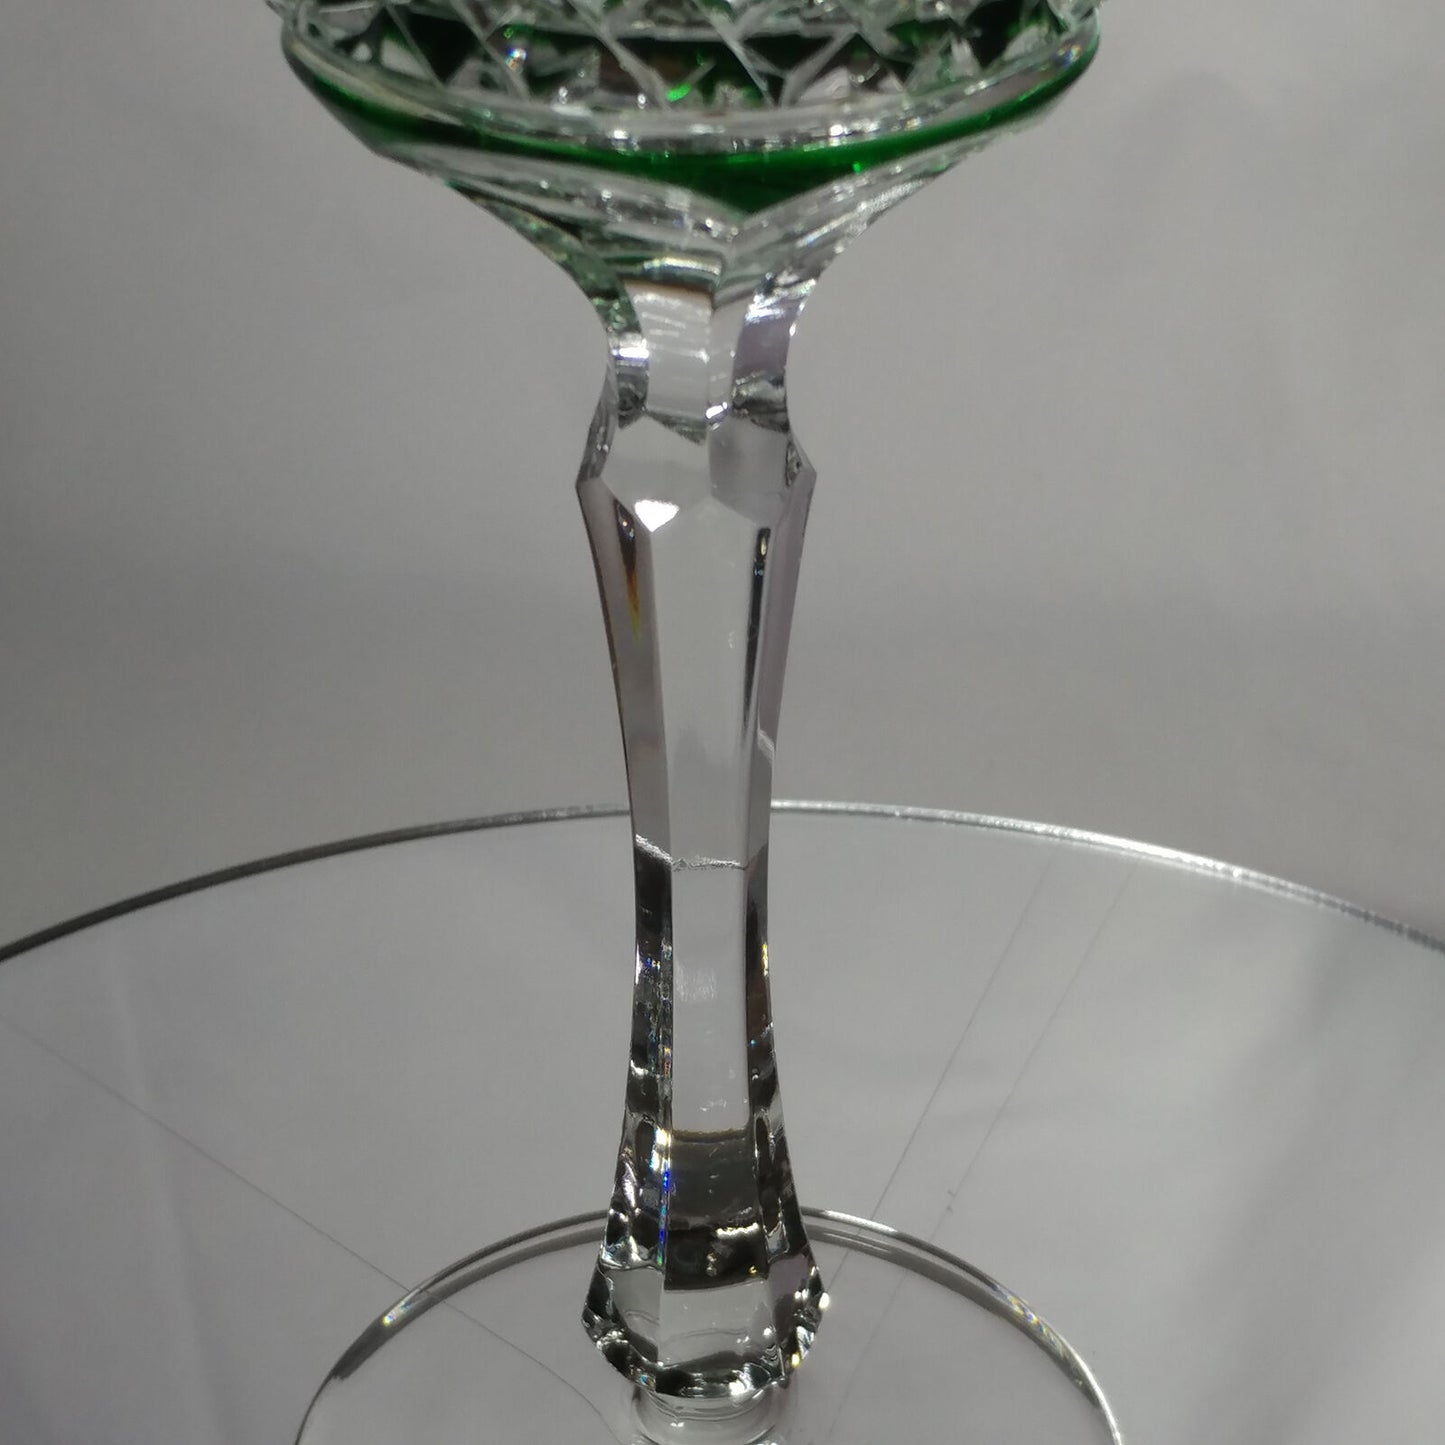 FABERGE XENIA IMPERIAL EMERALD GREEN  CRYSTAL GOBLET | SINGLE